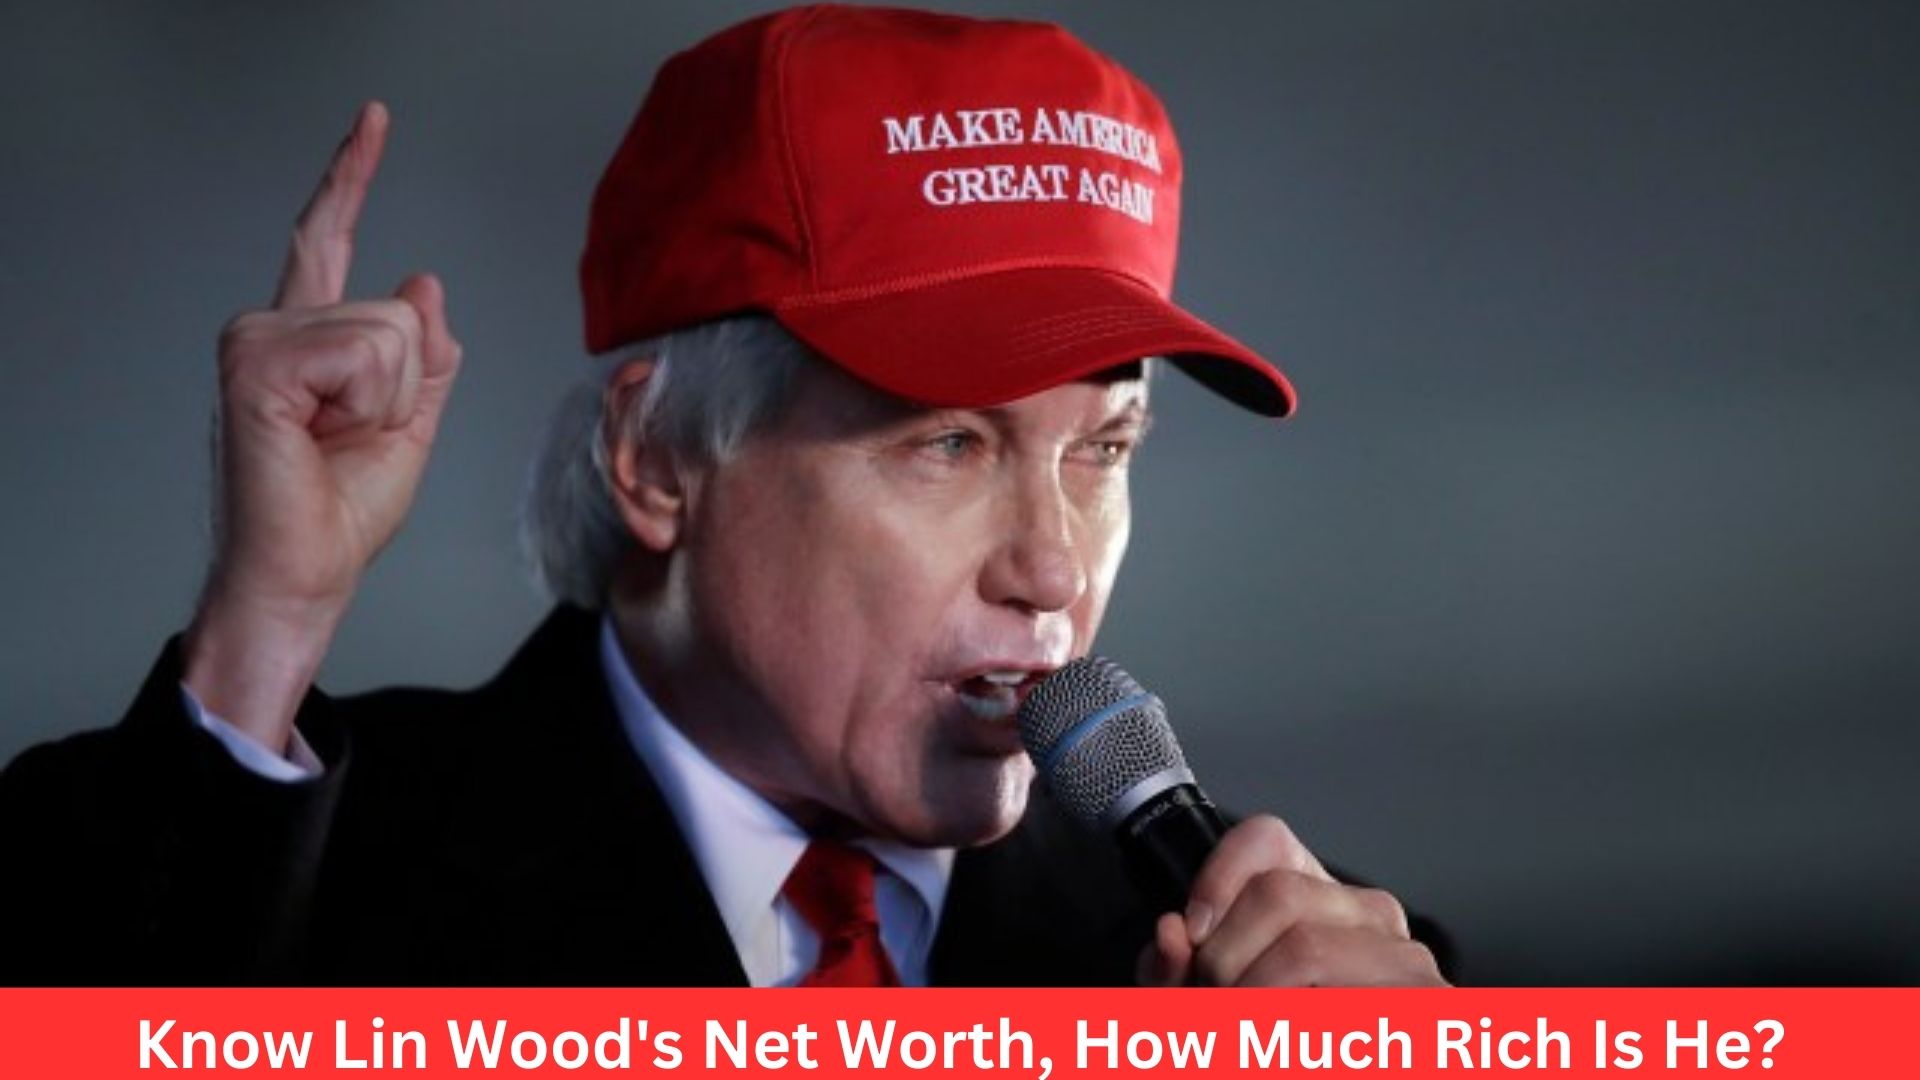 Know Lin Wood's Net Worth, How Much Rich Is He?